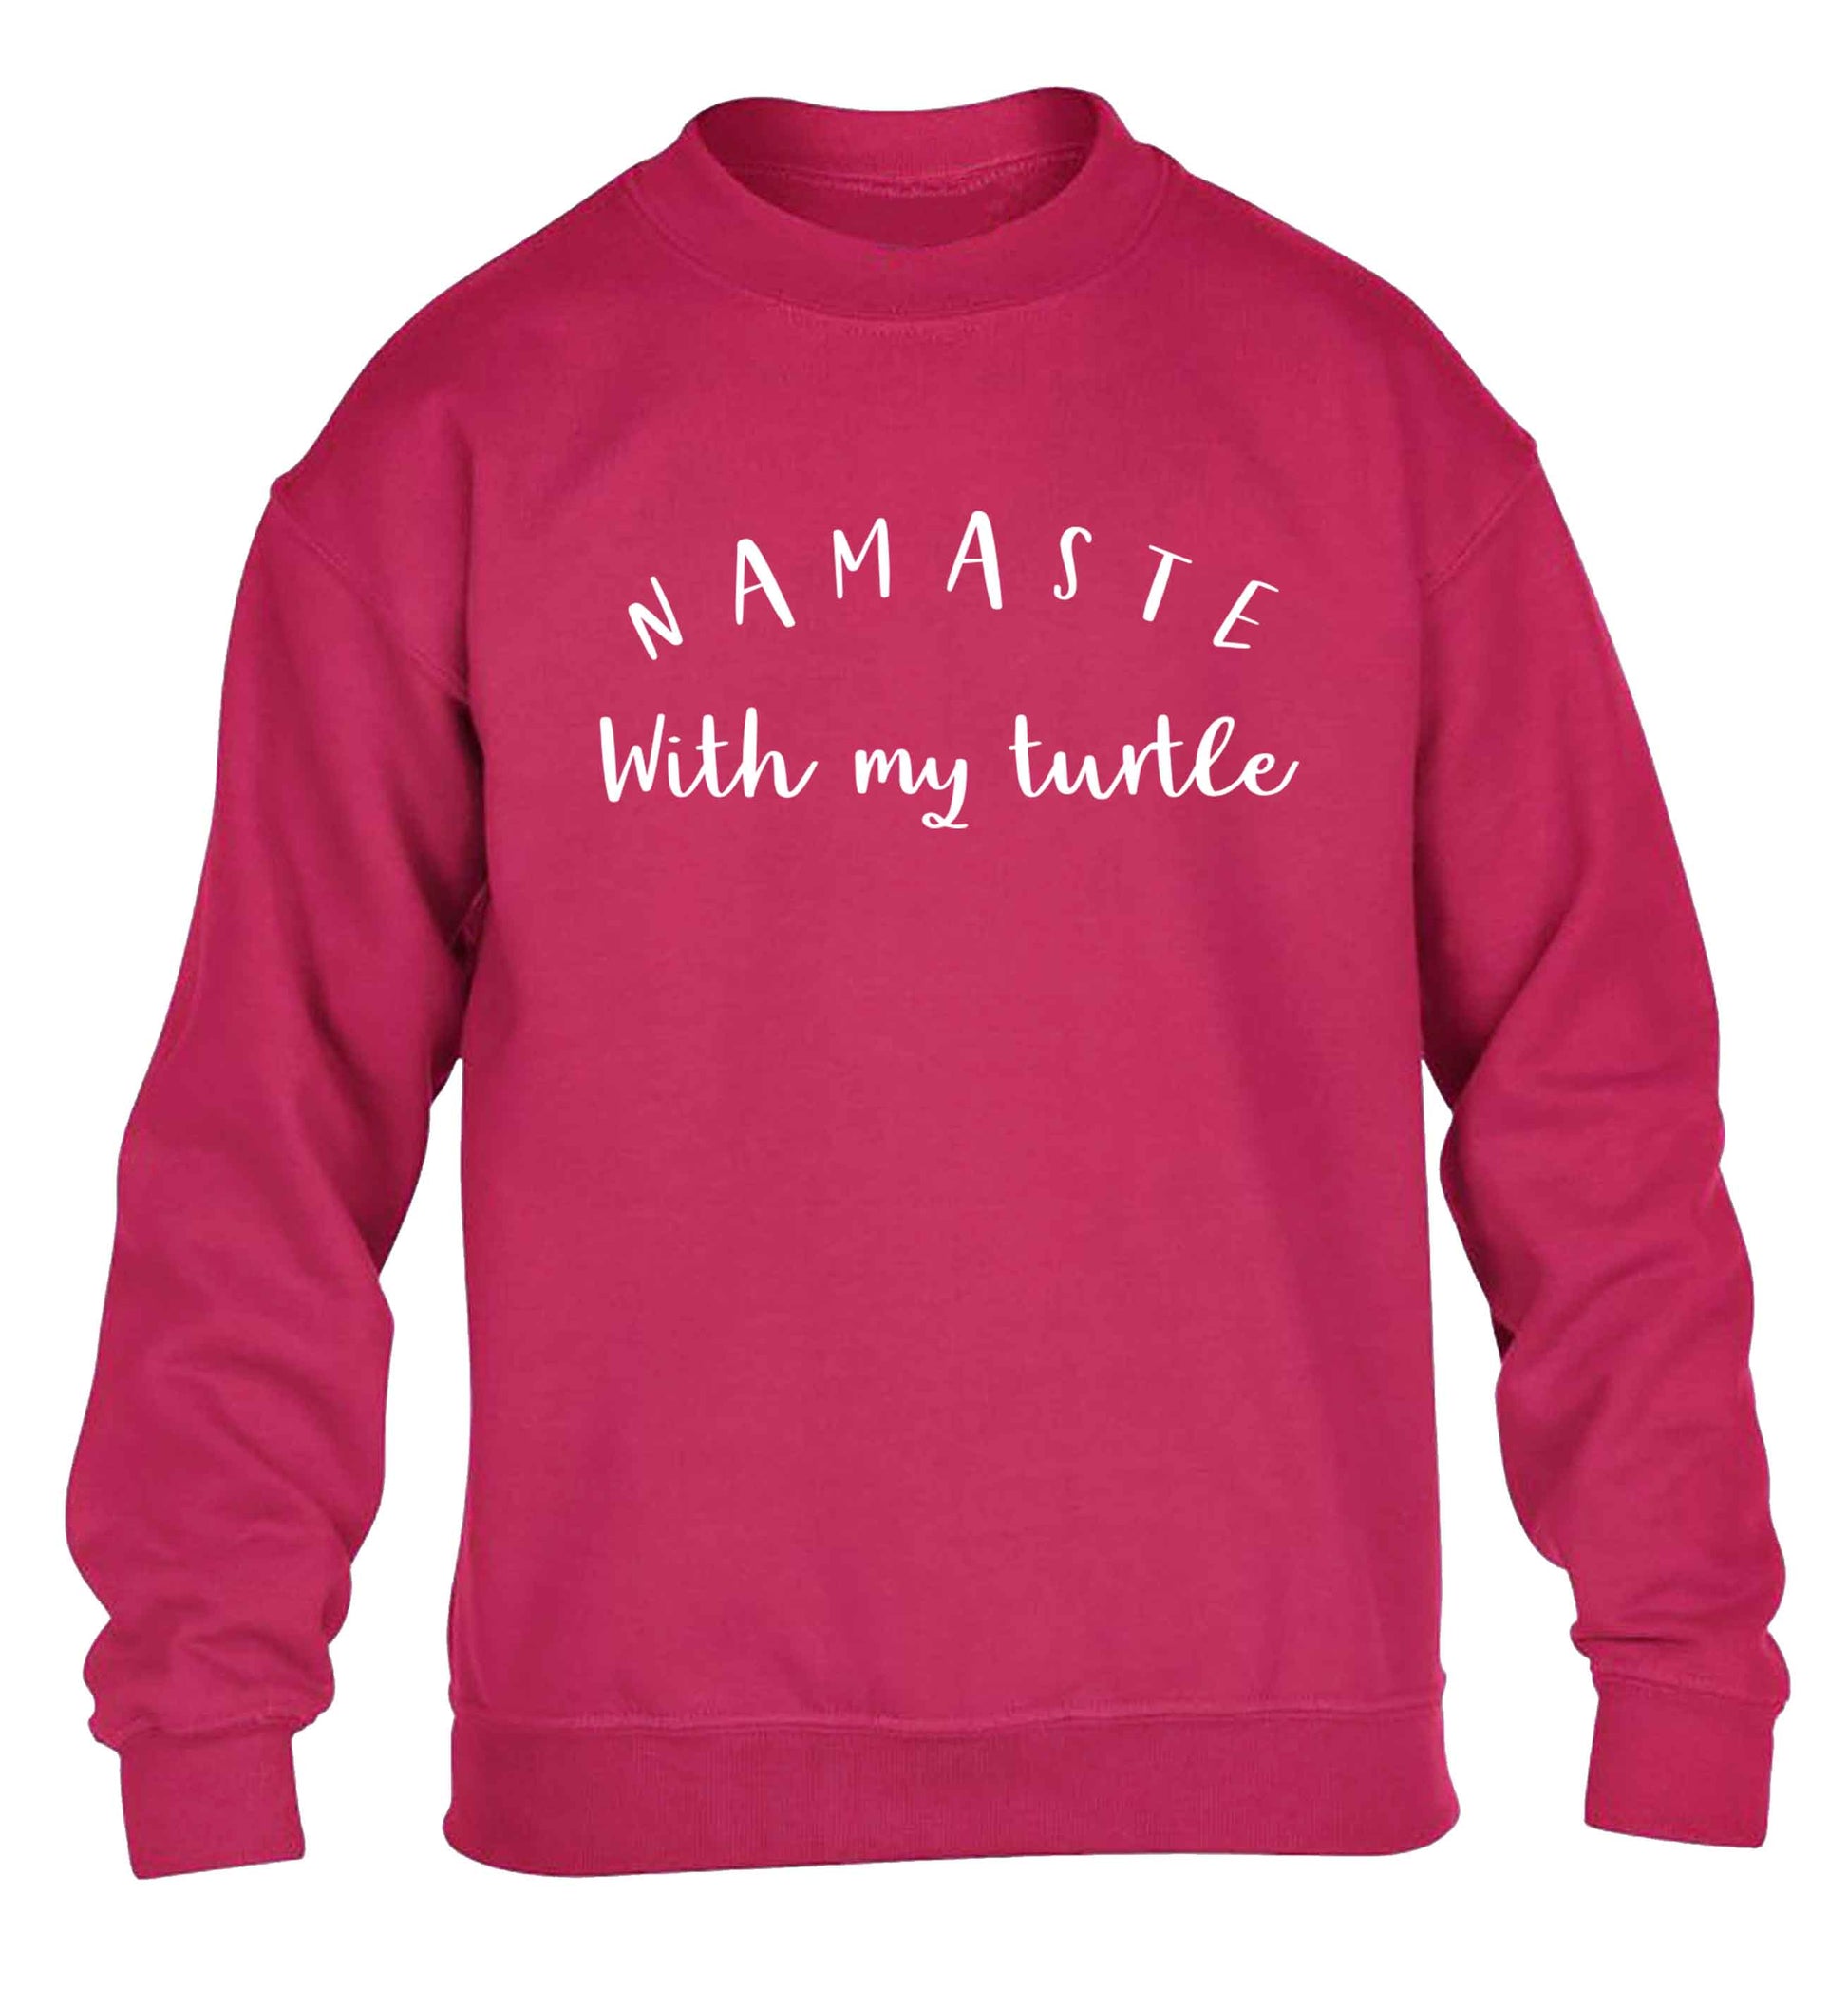 Namaste with my turtle children's pink sweater 12-13 Years